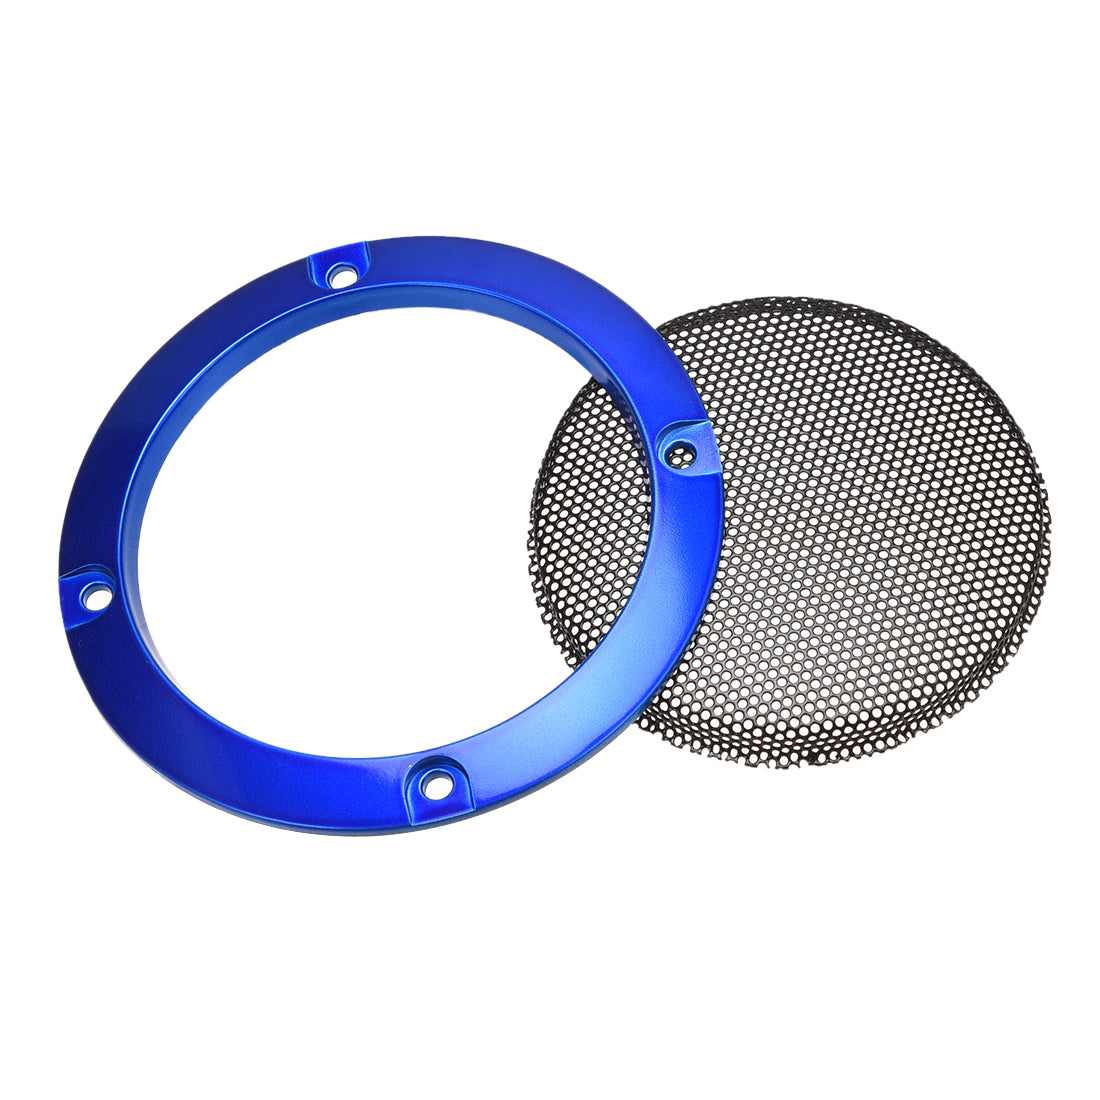 uxcell Uxcell Grill 3 Inch 95mm Mesh Circle Subwoofer Guard Protector Black and Blue 2pcs